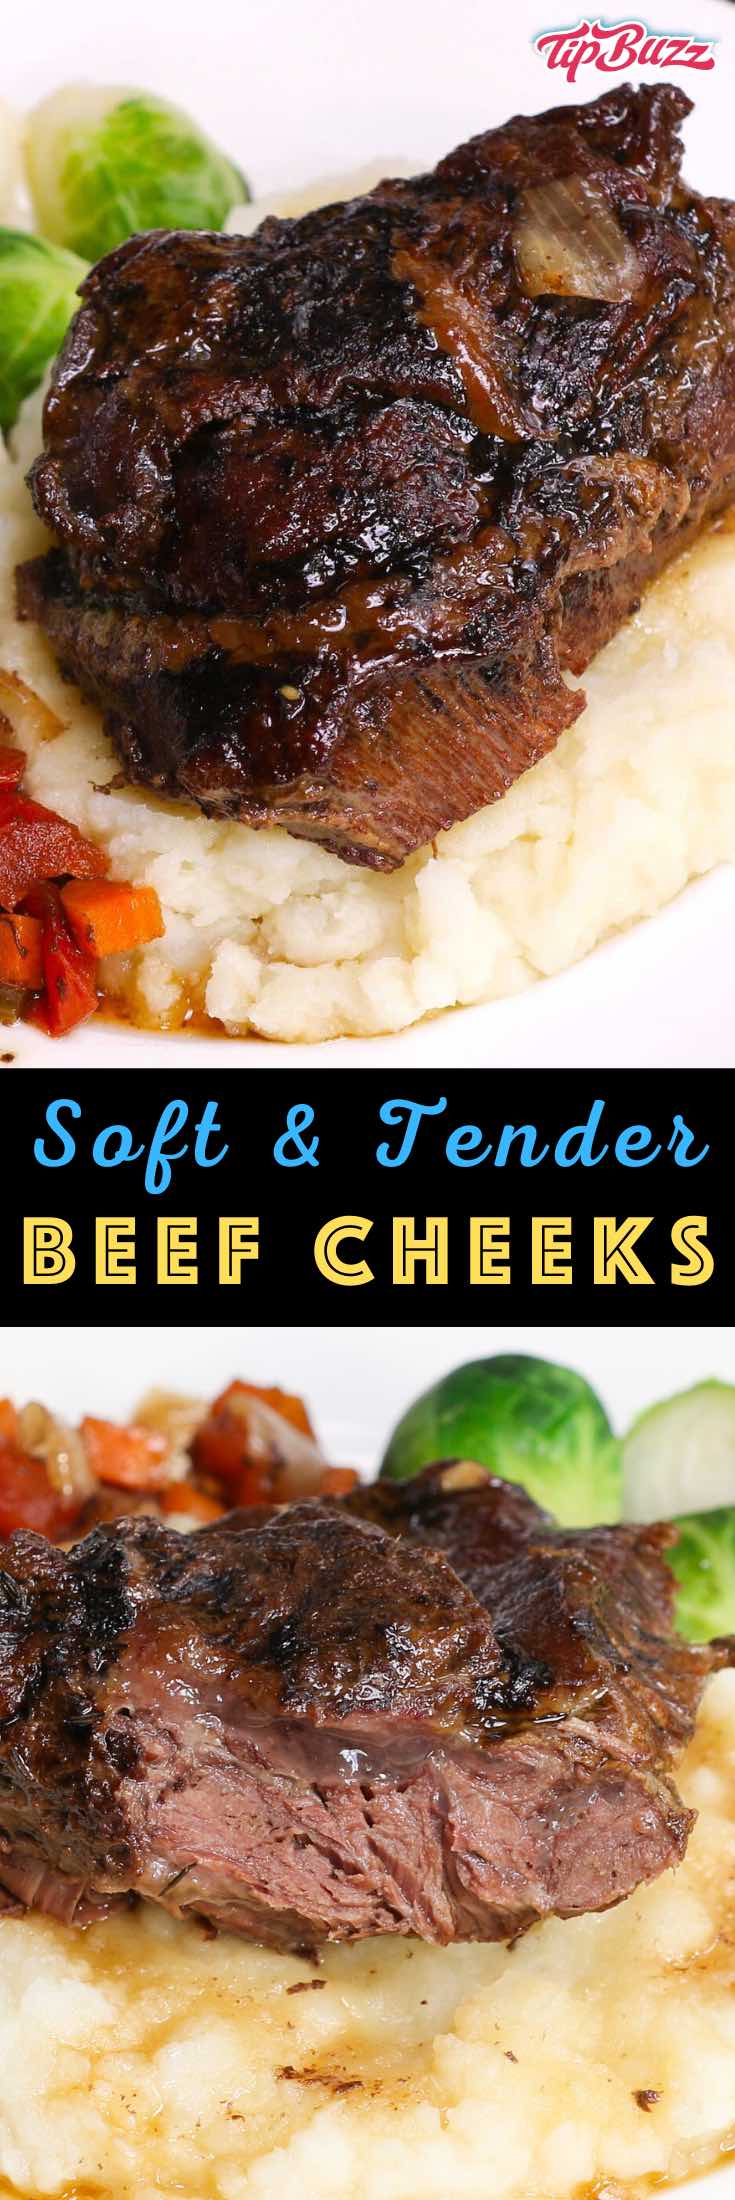 Braised Beef Cheeks in the slow cooker melt in your mouth with juicy beef flavors. Serve them on top of mashed potatoes for a delicious dinner that everyone will love, kids included. #beefcheeks